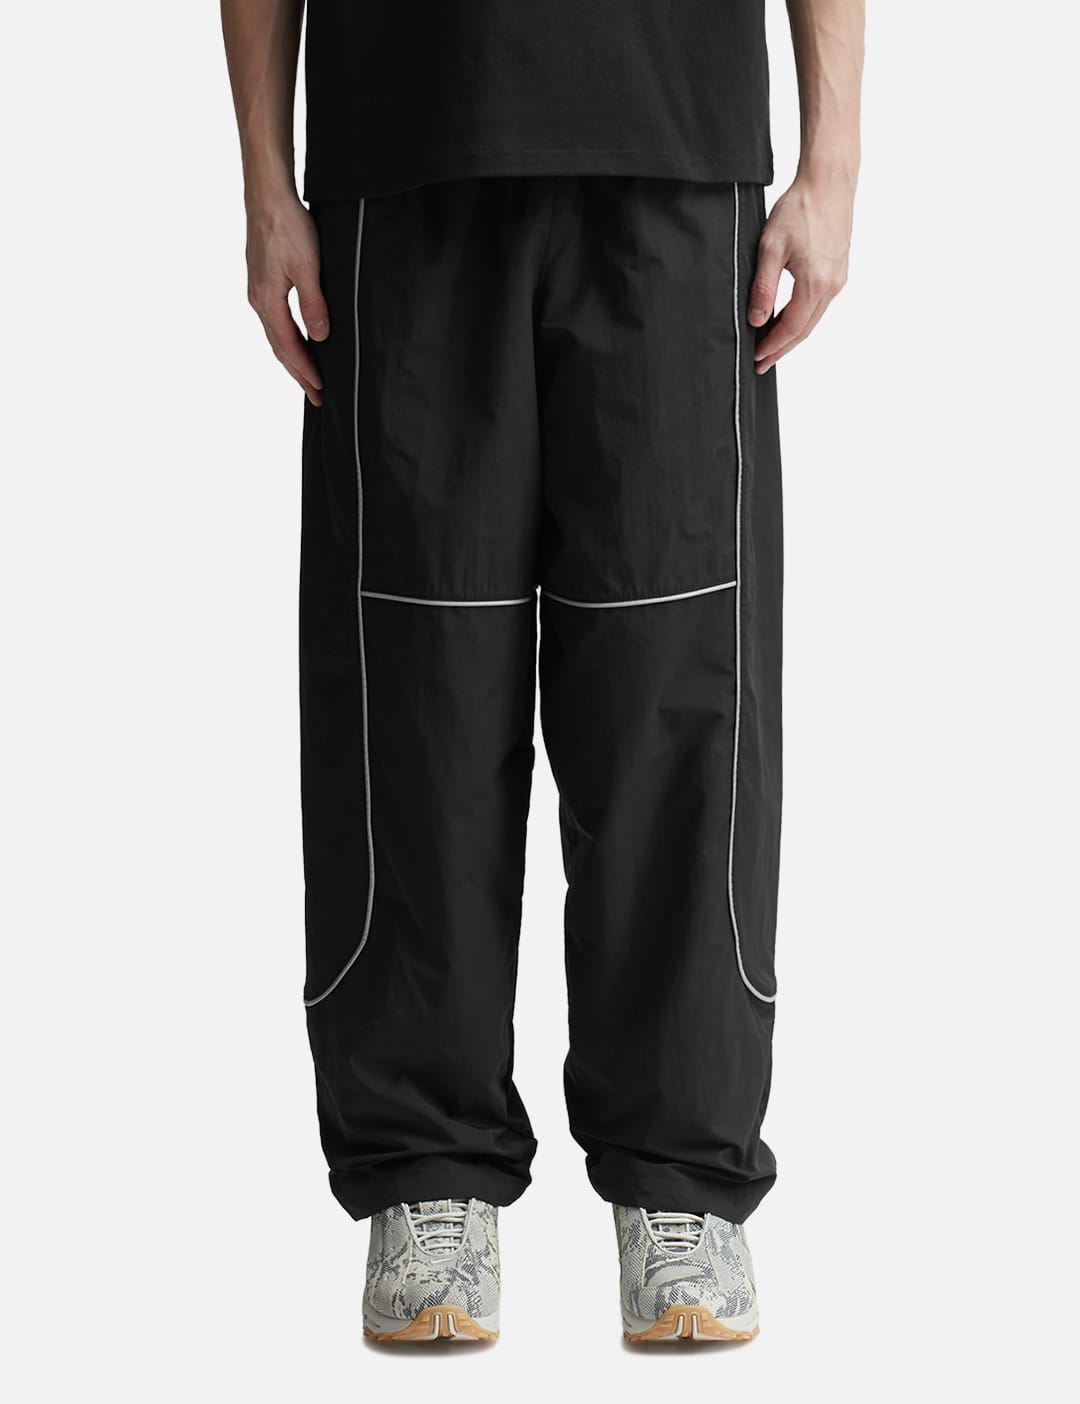 The North Face - Tek Piping Wind Pants | HBX - Globally Curated